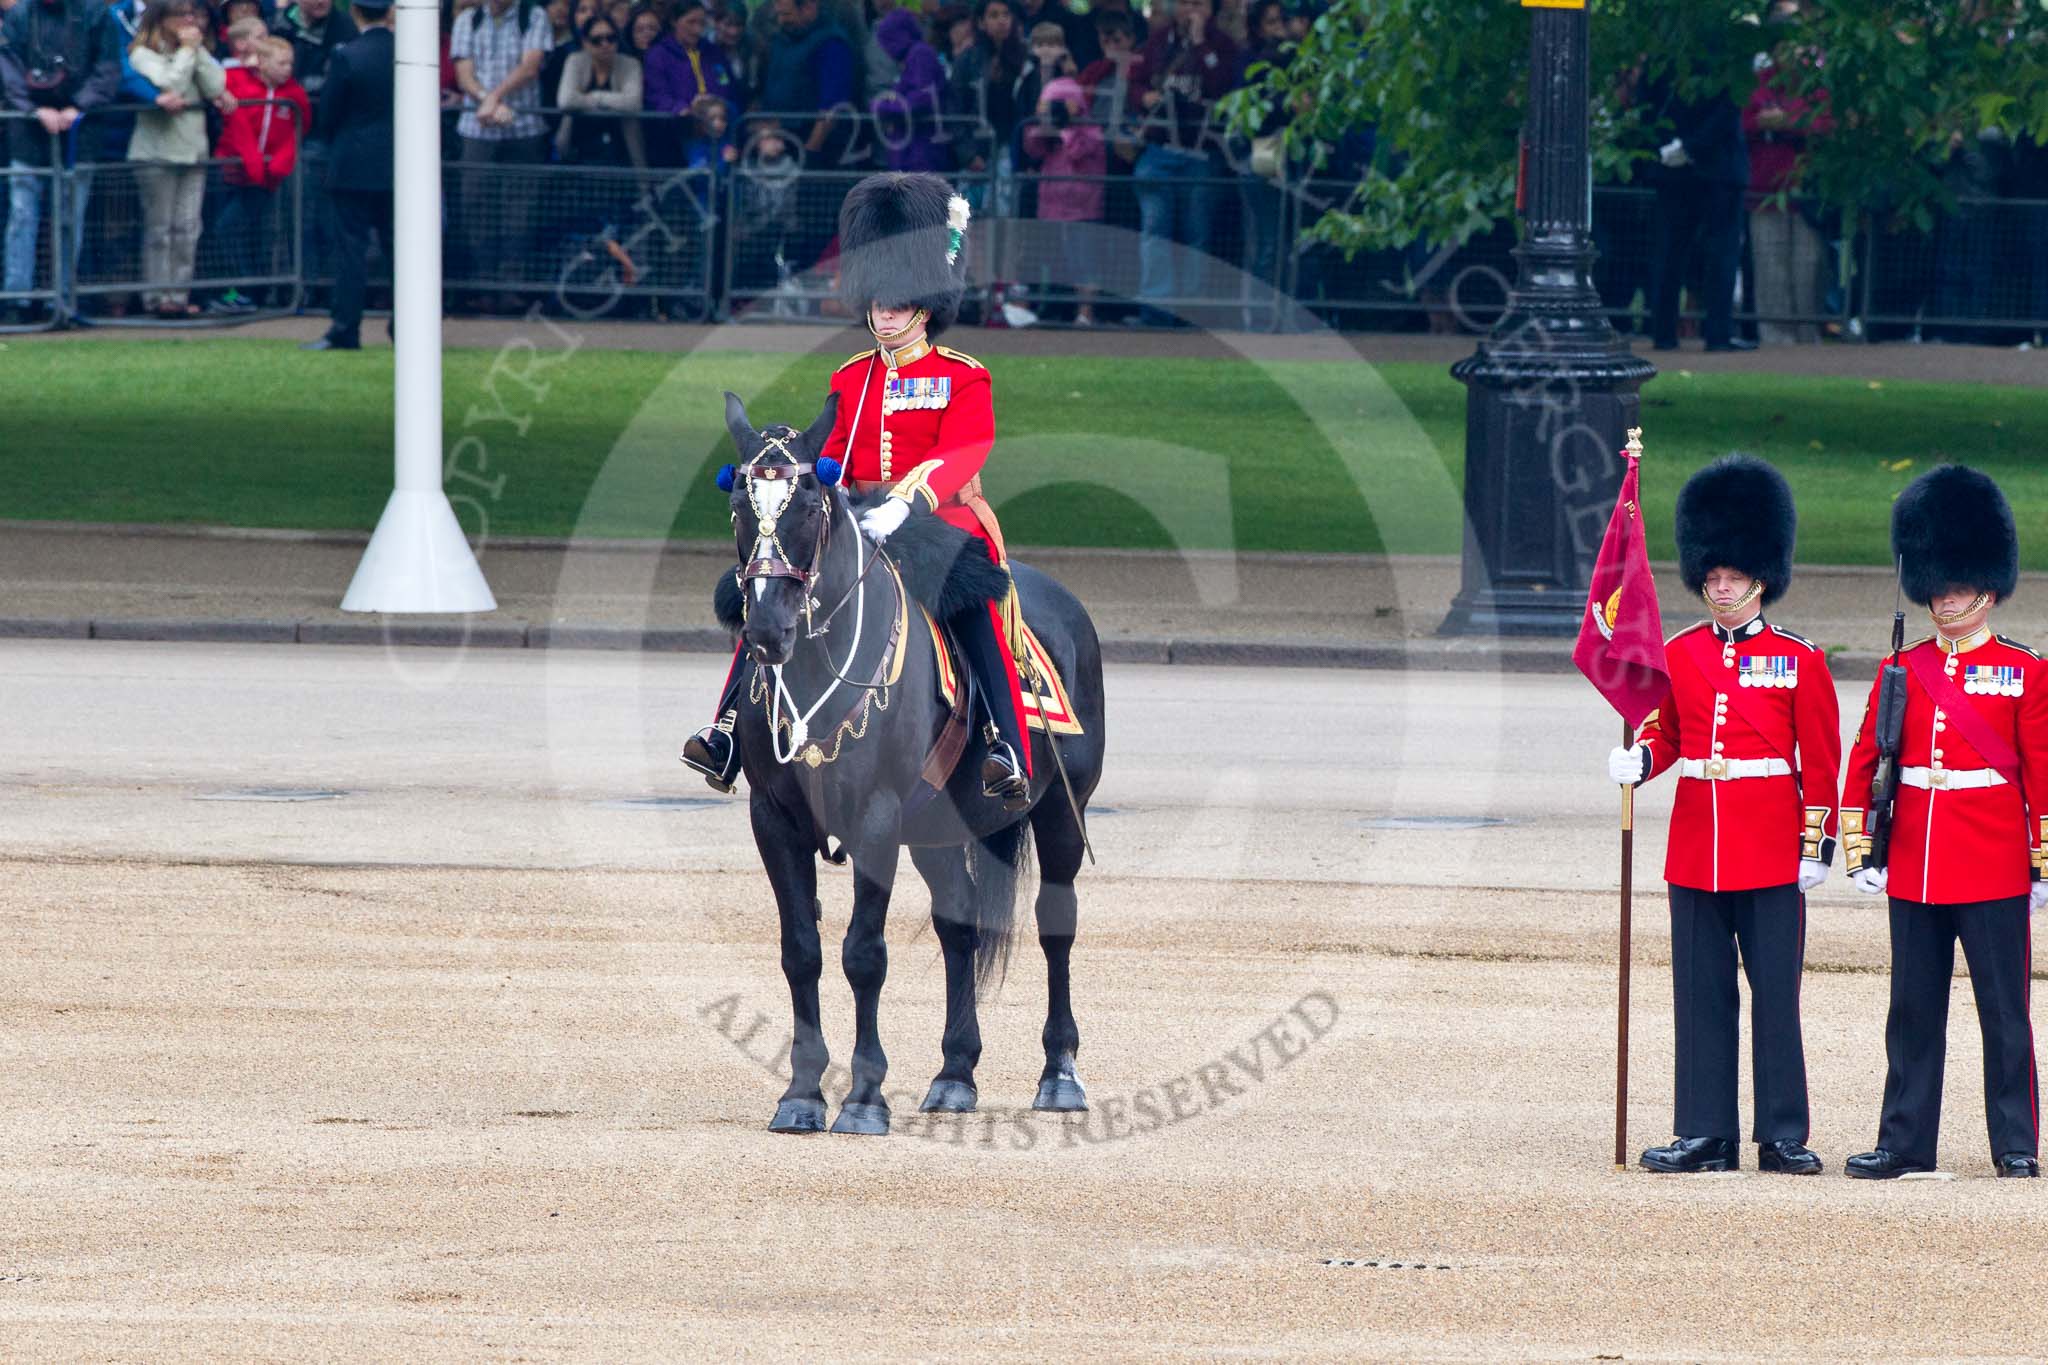 Trooping the Colour 2011: The Major of the Parade, Major Benedict Peter Norman Ramsay, Welsh Guards. He was awarded a CBE on the day of the parade..
Horse Guards Parade, Westminster,
London SW1,
Greater London,
United Kingdom,
on 11 June 2011 at 10:43, image #75